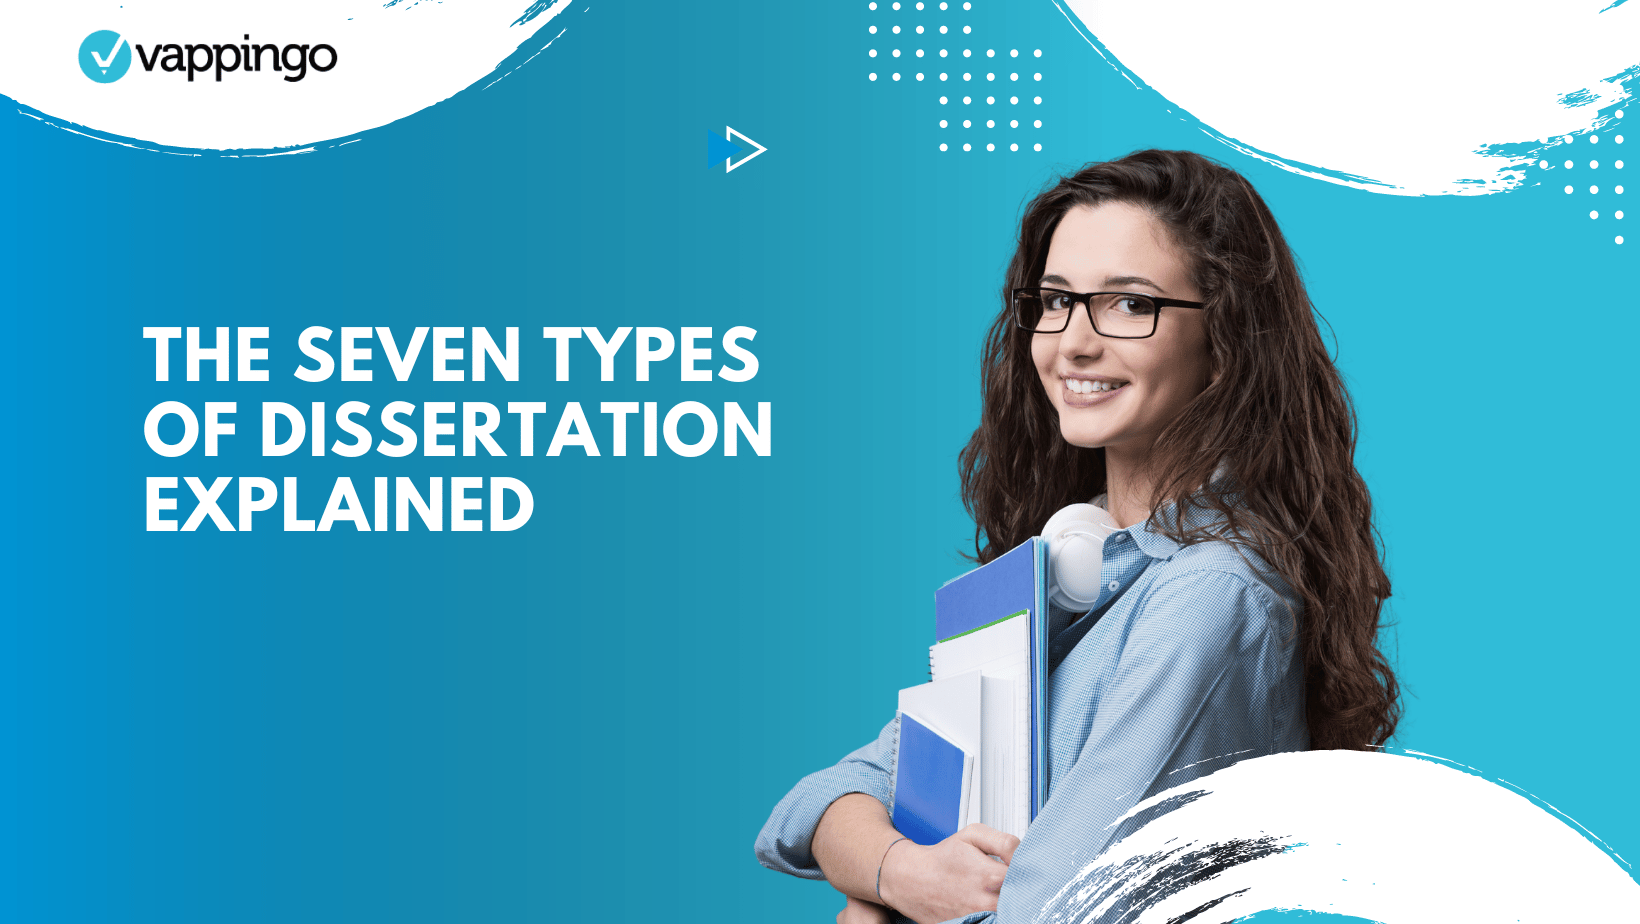 The 7 types of dissertation explained